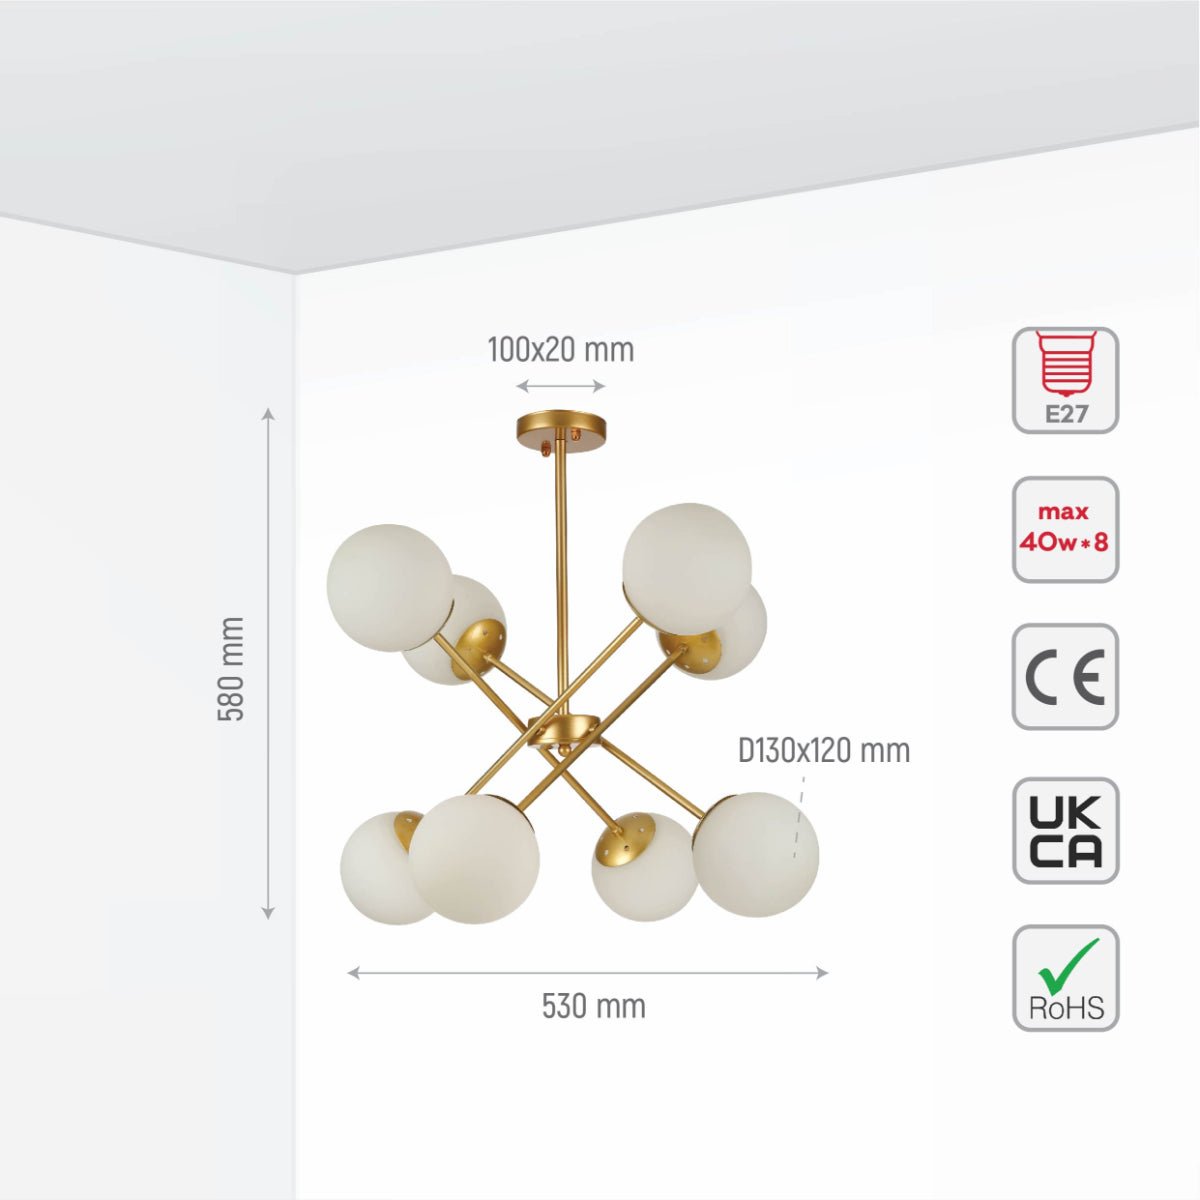 Size and specs of Gold Sputnik Metal Opal Globe Glass Modern Ceiling Light with E27 Fittings | TEKLED 159-17658